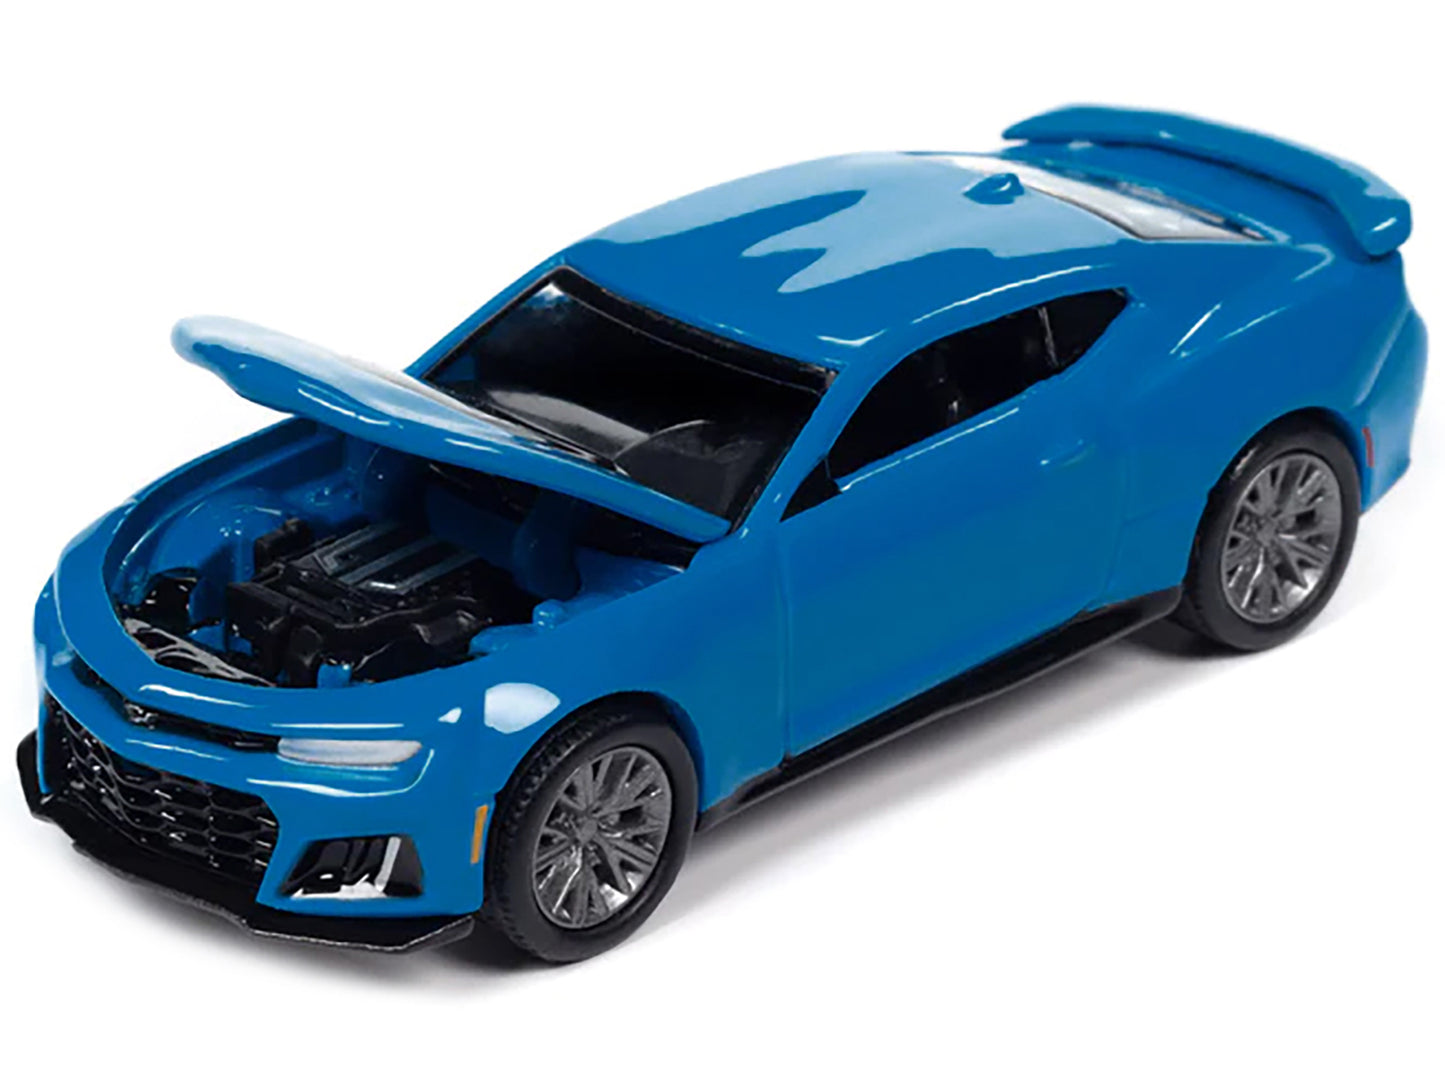 2022 Chevrolet Camaro ZL1 Rapid Blue "Modern Muscle" Limited Edition 1/64 Diecast Model Car by Auto World